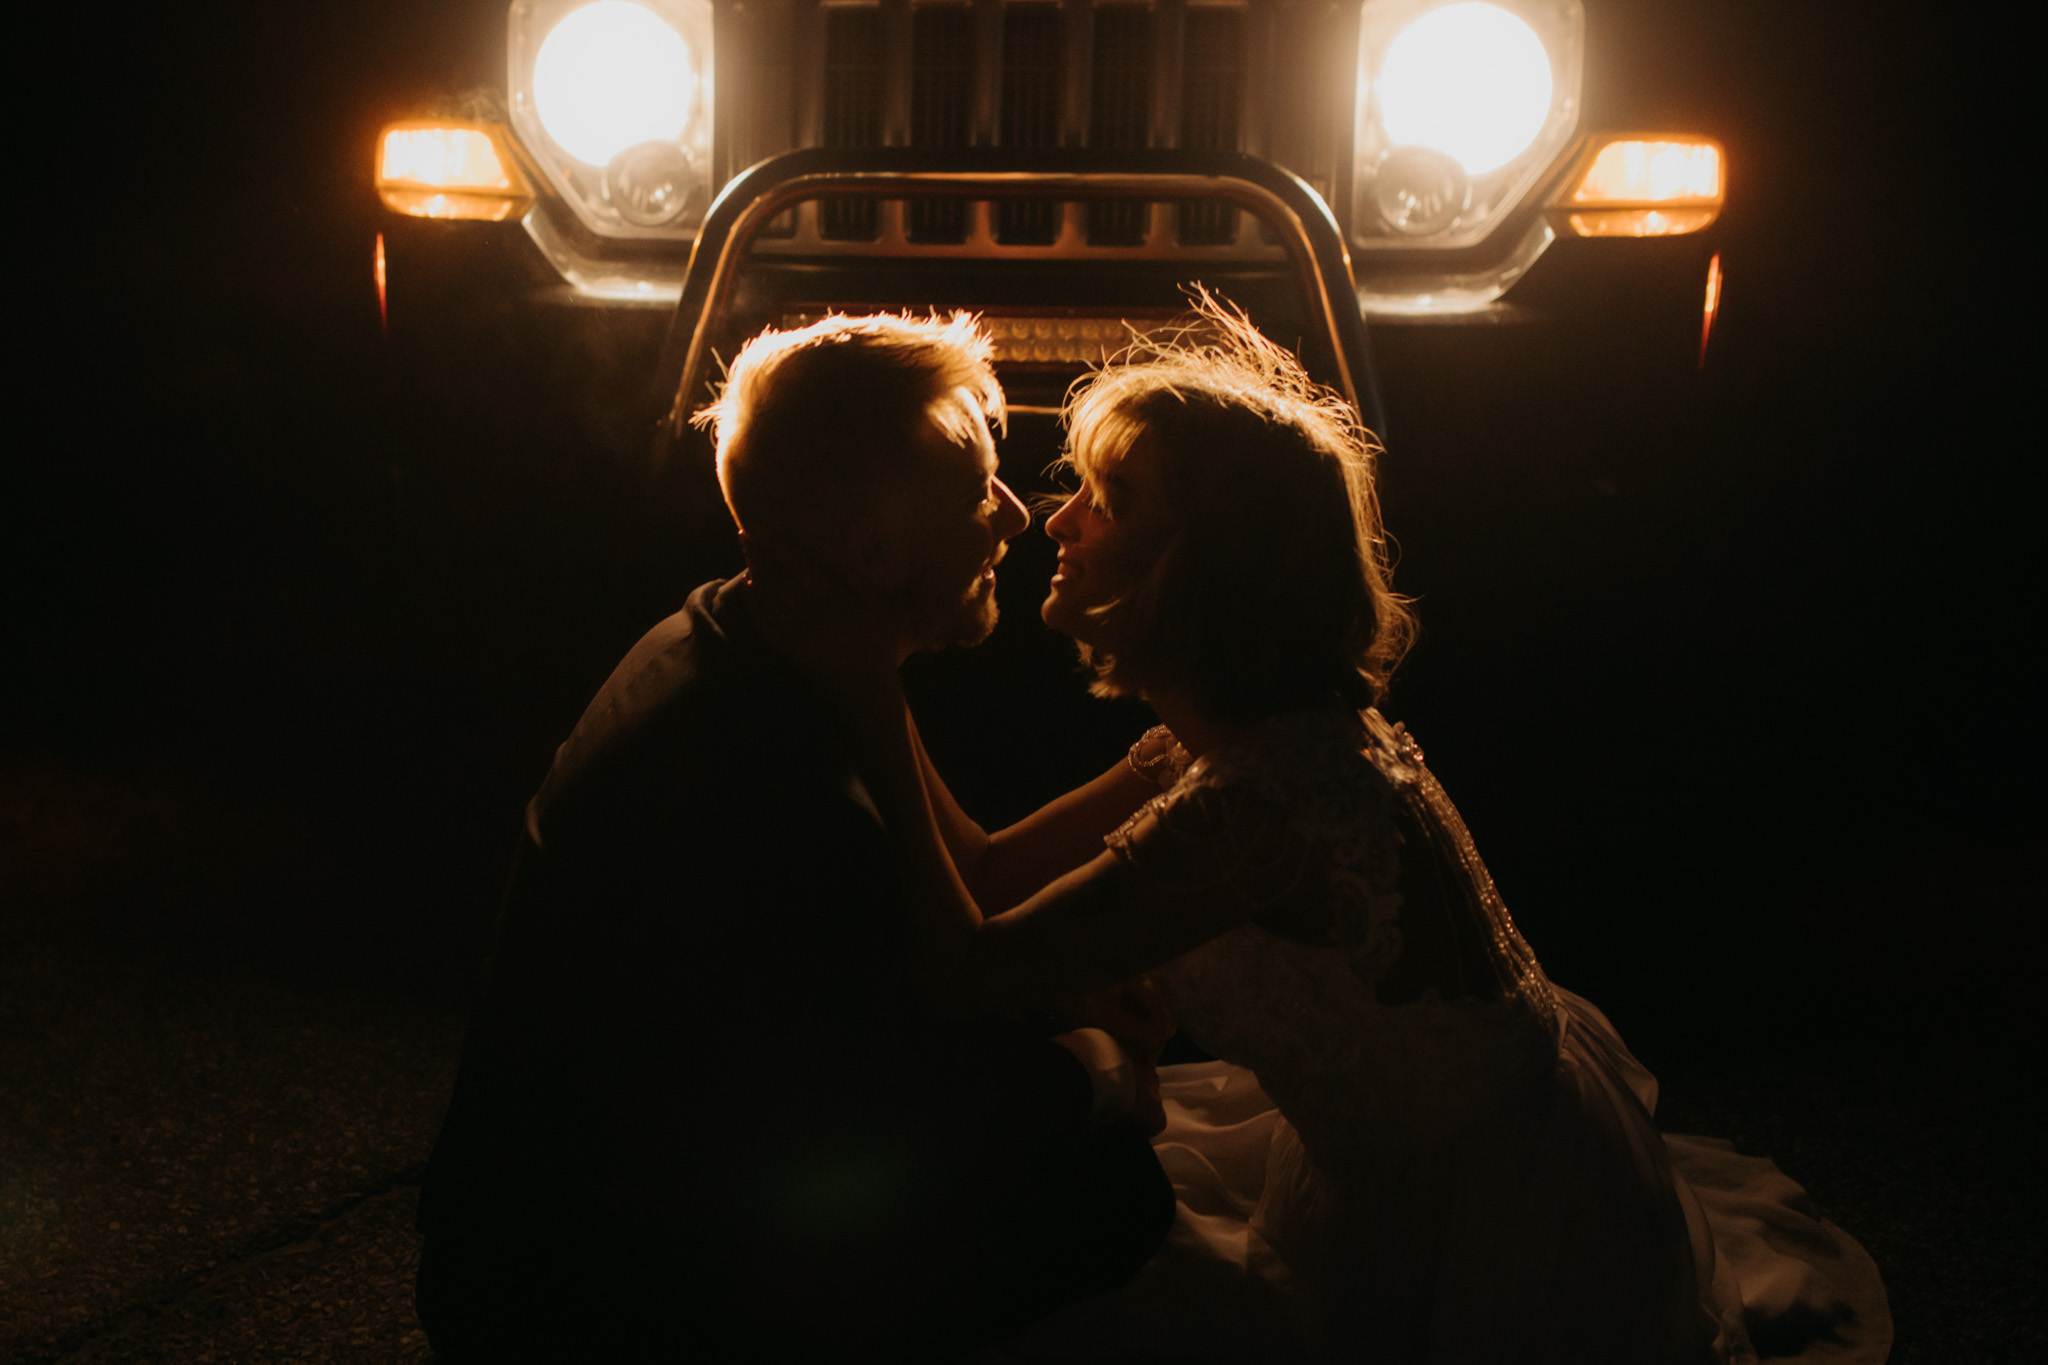 Intimate elopement photos with car headlights